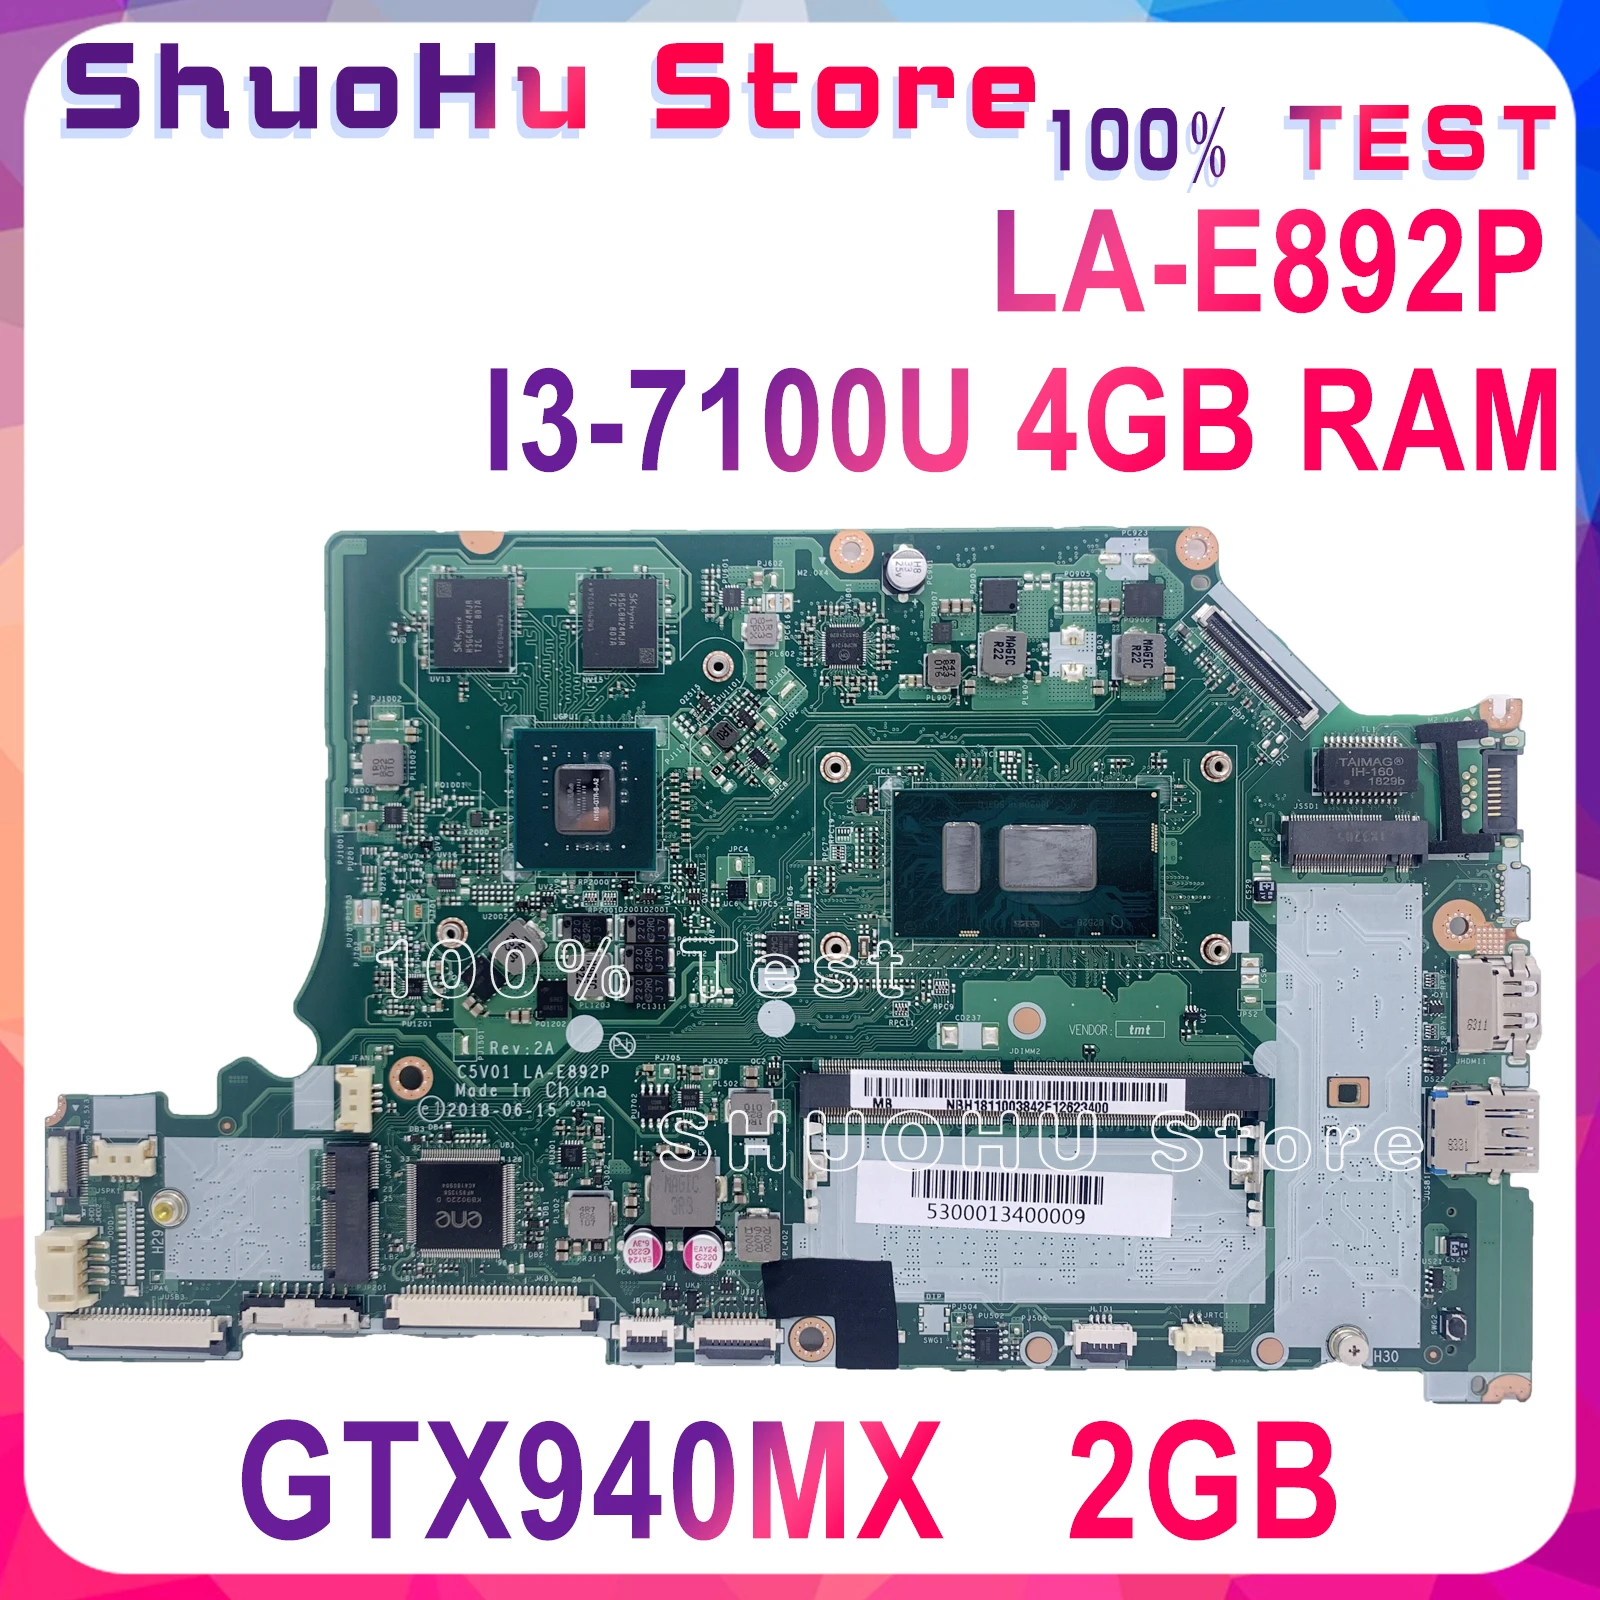 

A515-51G Maintherboard Suitable For Acer A515-51 LA-E892P A615-51G C5V01Notebook Motherboard I3-7100U 4GB Full Function 100%Test